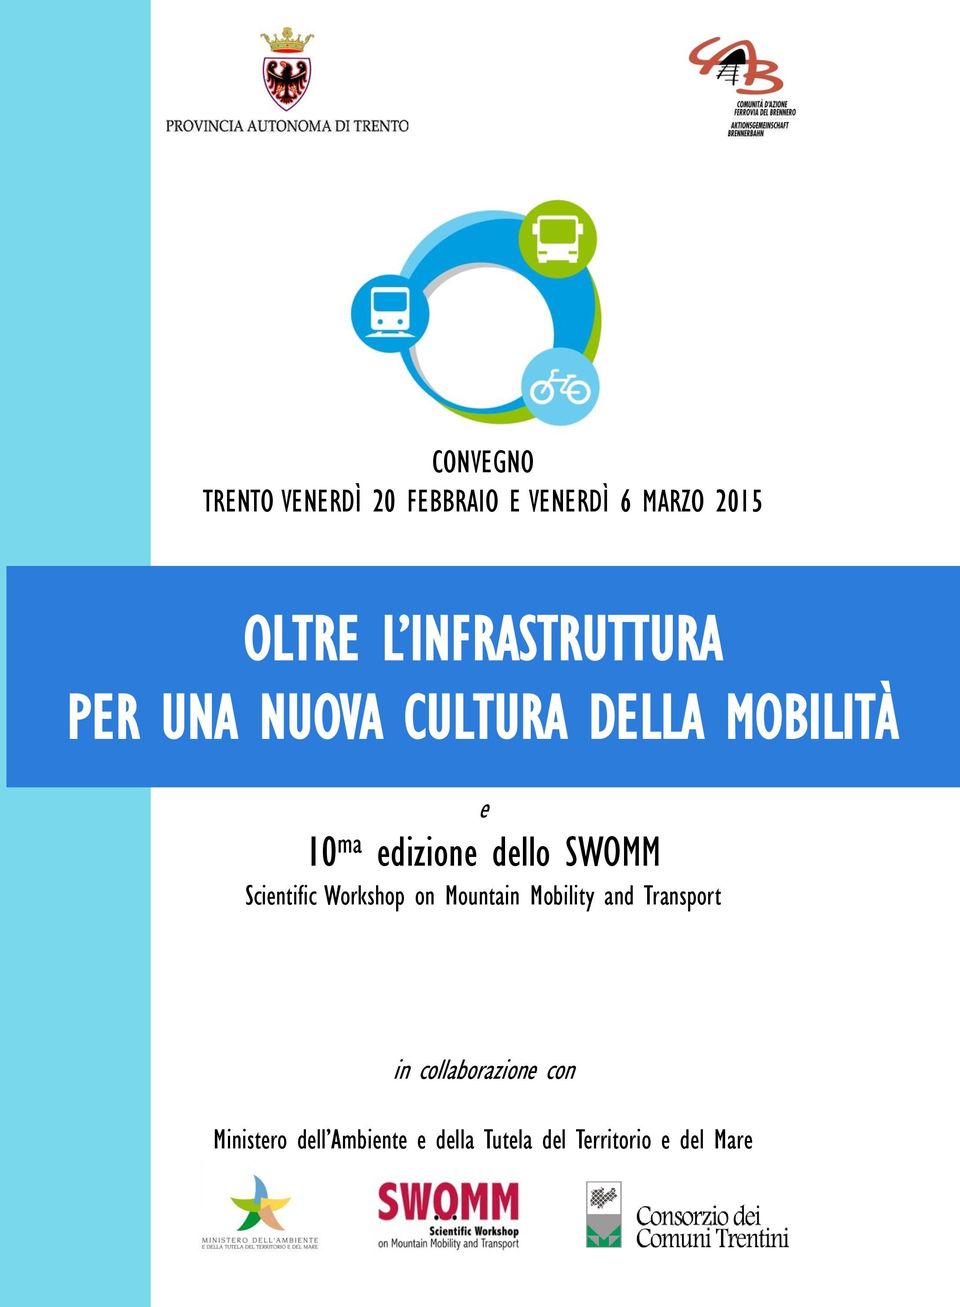 dello SWOMM Scientific Workshop on Mountain Mobility and Transport in